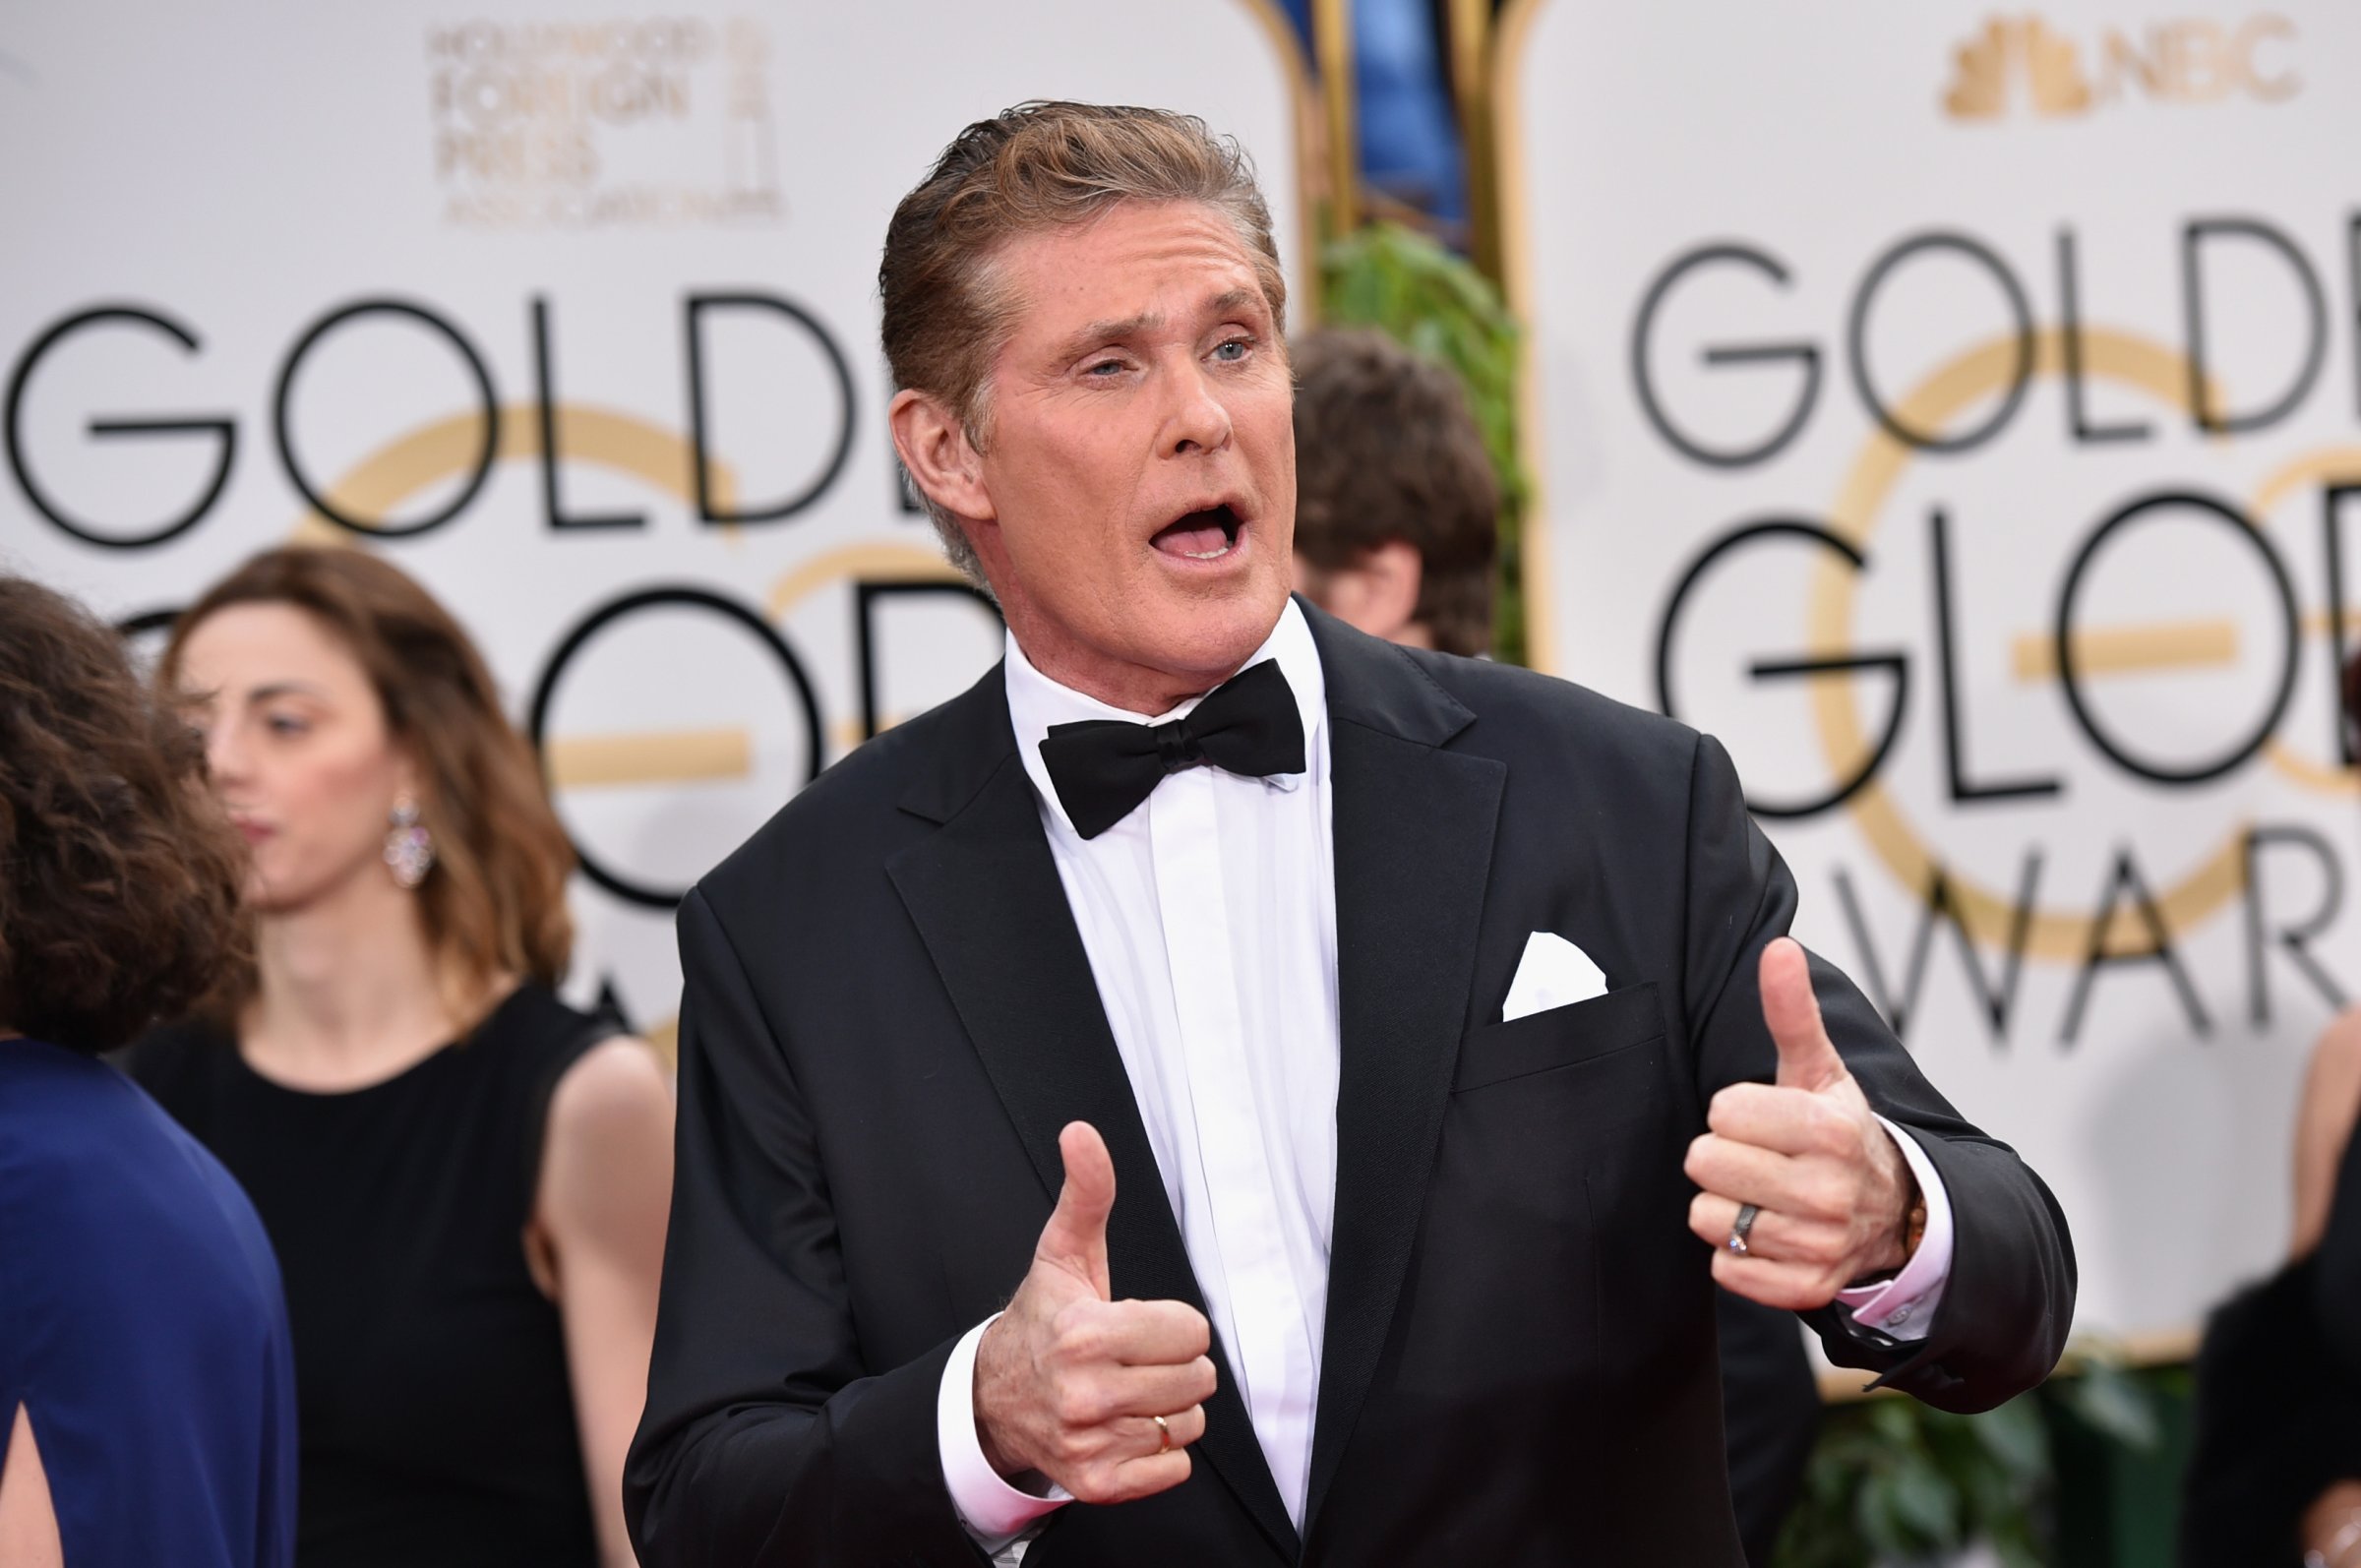 Actor David Hasselhoff attends the 73rd Annual Golden Globe Awards held at the Beverly Hilton Hotel on January 10, 2016 in Beverly Hills, California.